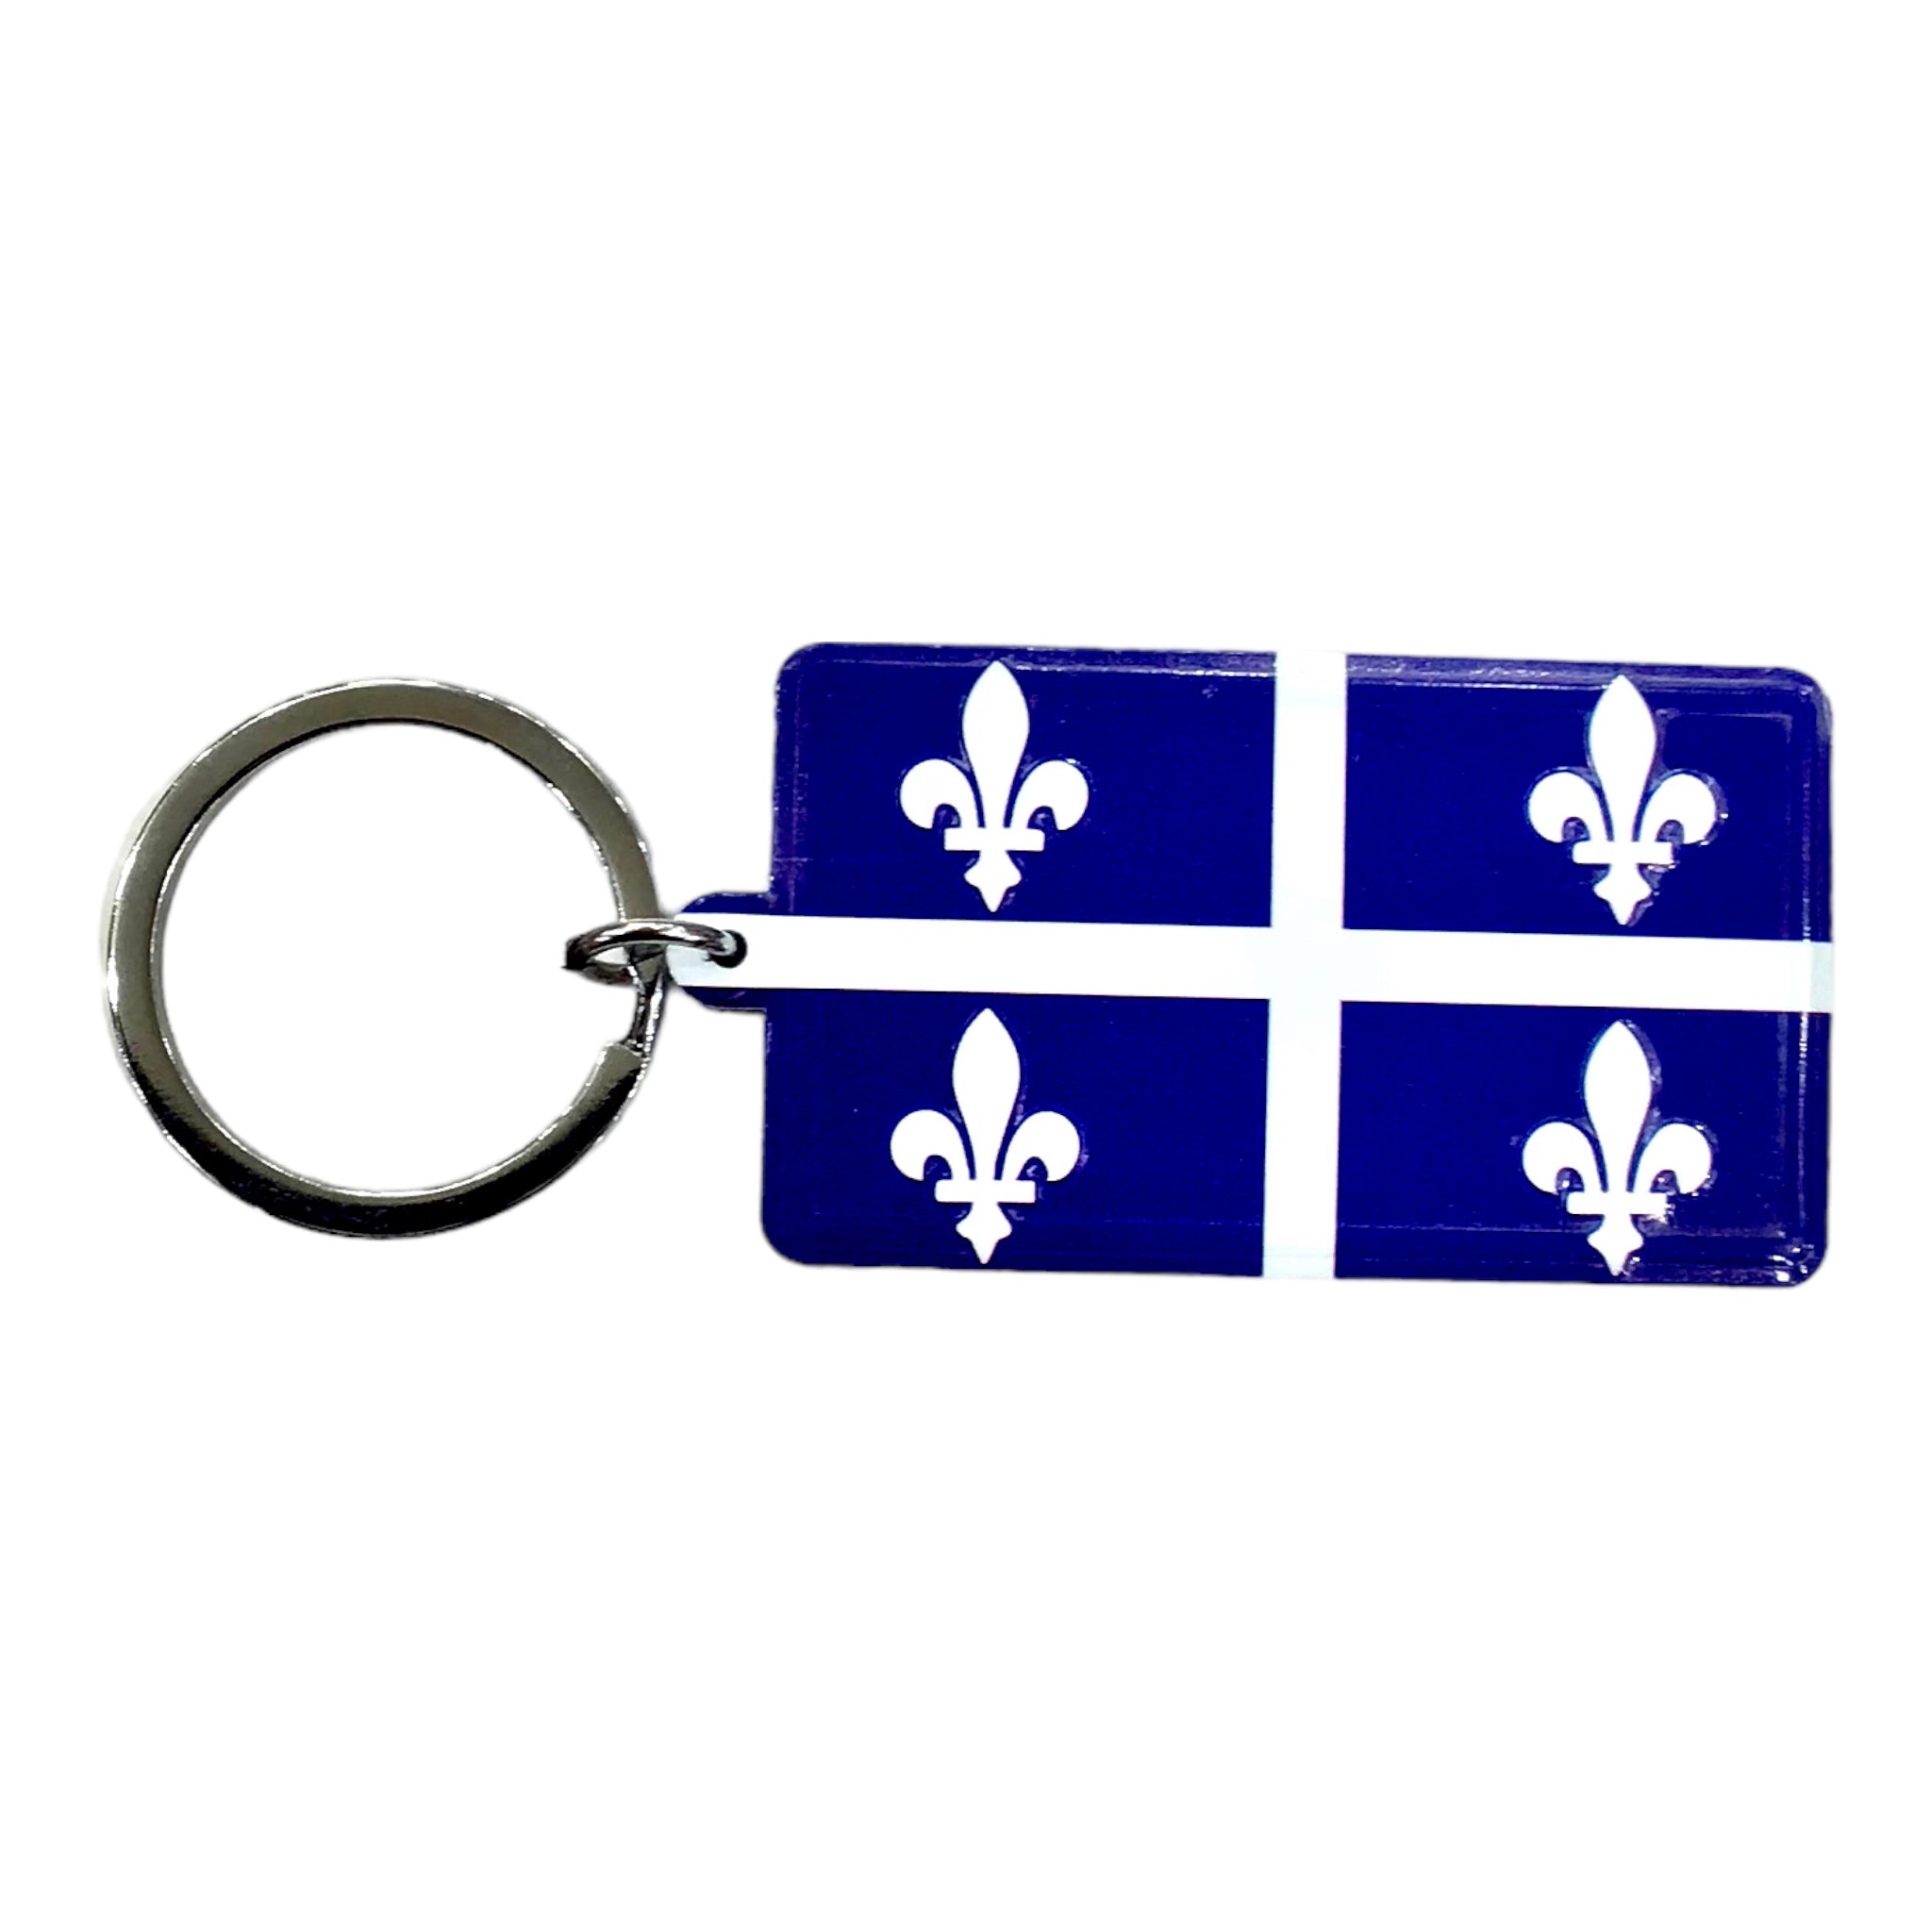 Canada Flag Double Sided Acrylic Keychains - Vietnam Crafts